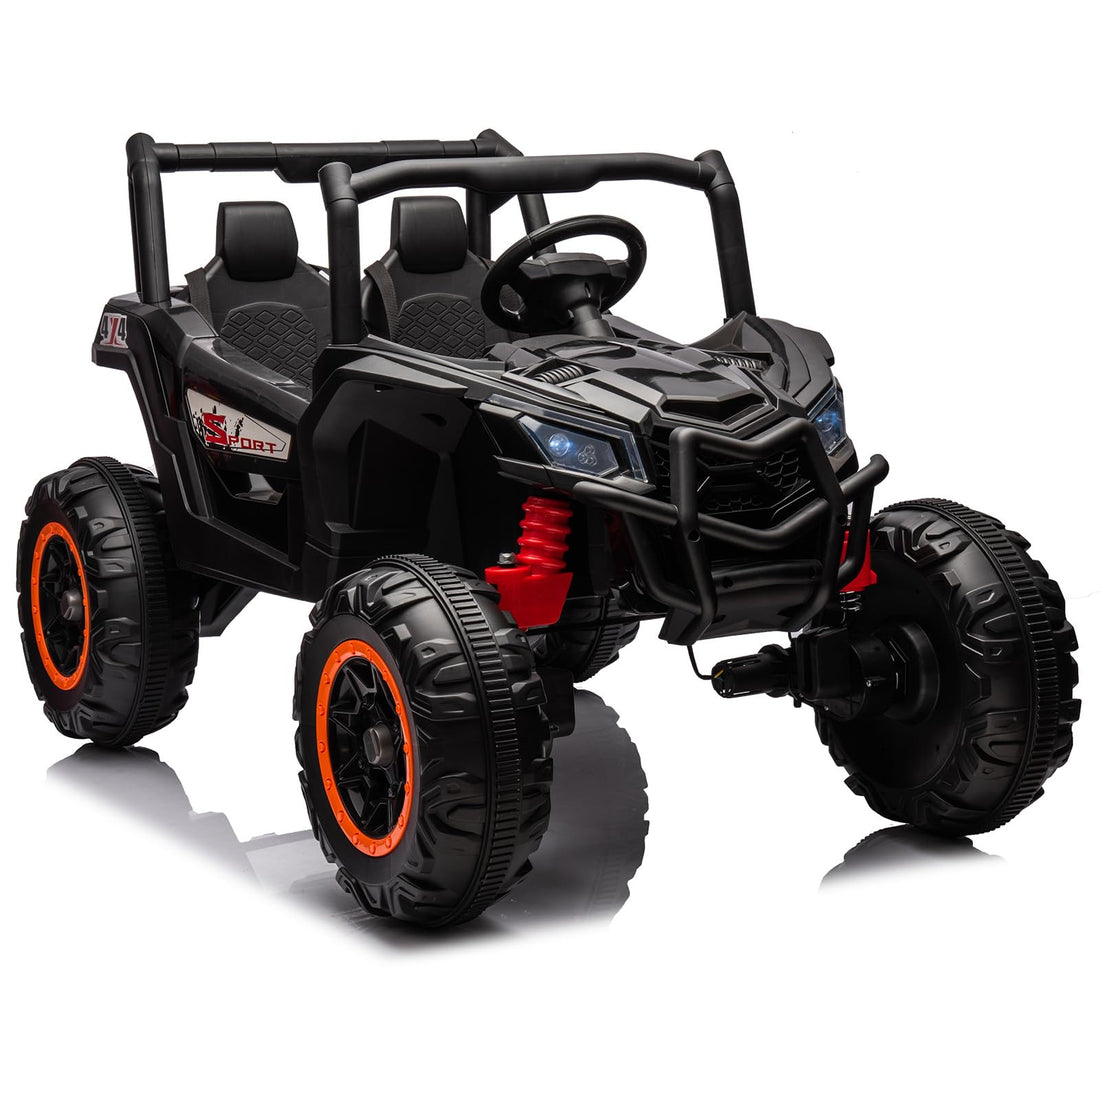 Ride on UTV Cars 2 Seater, 24V 4WD Off-Road Electric Vehicles, Off-Road UTV Truck Ride on Toy with Remote Control for Kids 3+, Metal Frame, EVA Wheels, LED, Spring Suspension